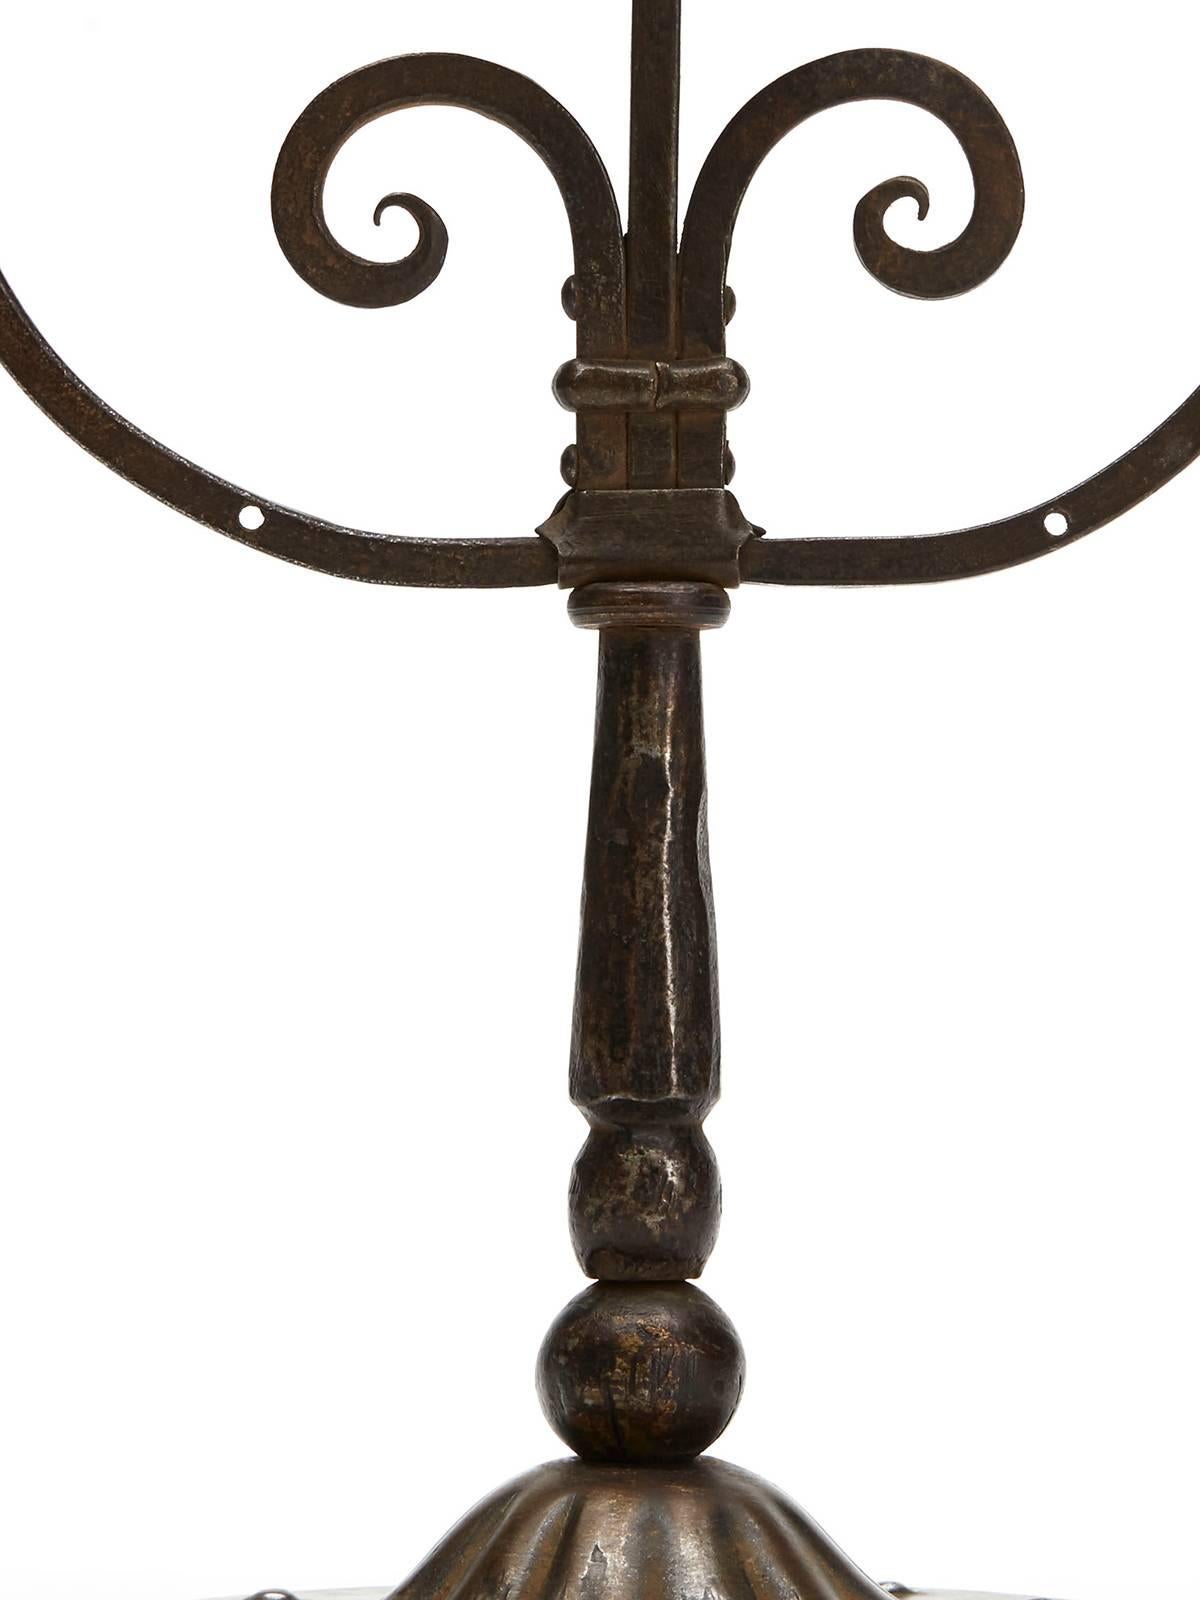 Patinated Viennese Secessionist Hugo Berger Candlestick, circa 1900